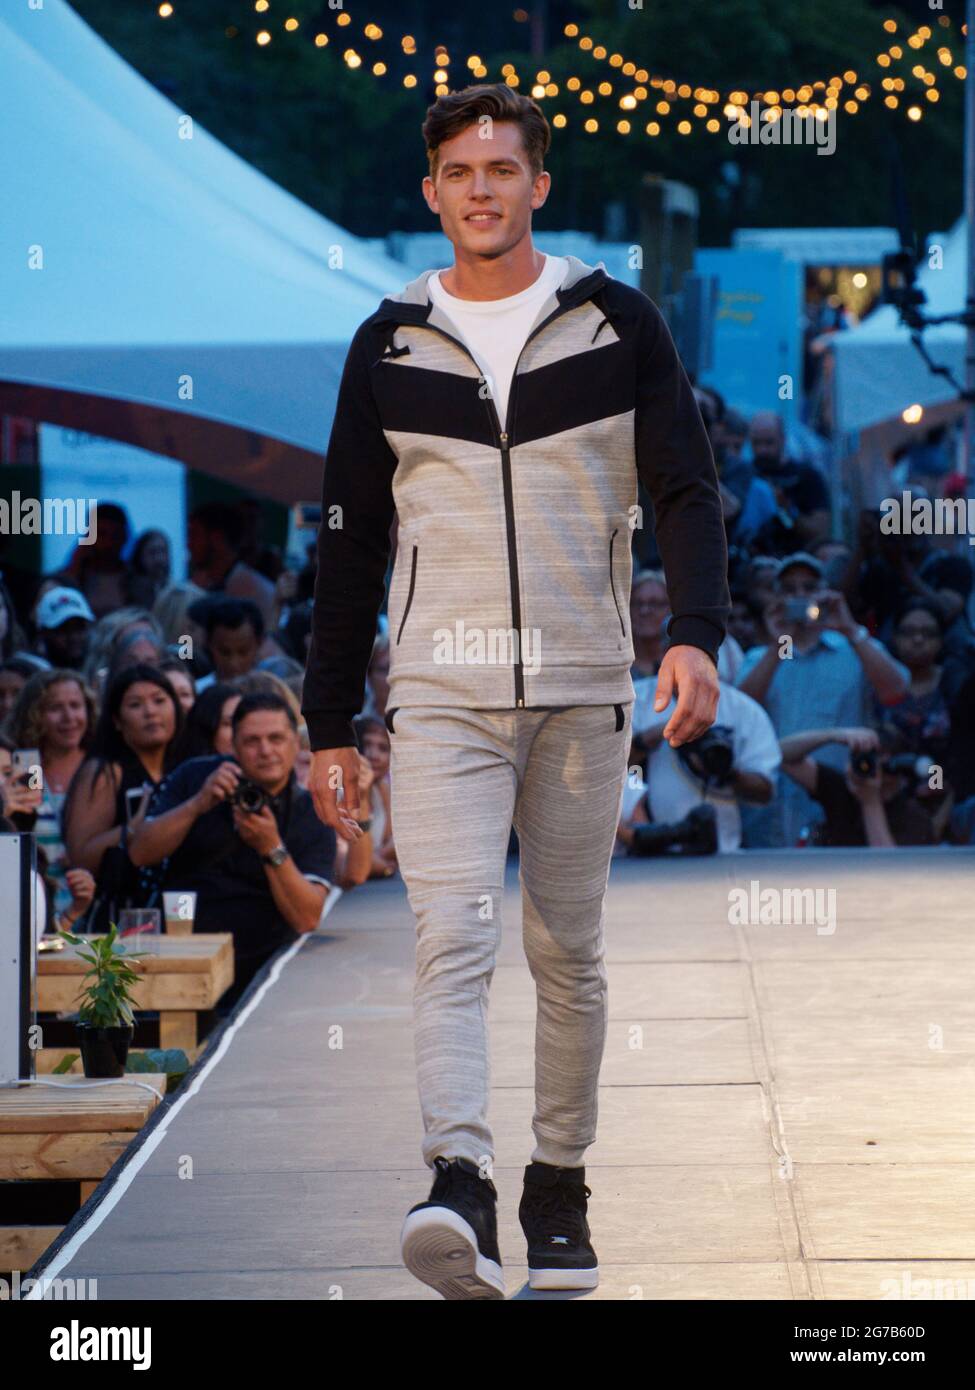 A Male Model Walks The Runway In Stylish Modern Black Business During A  Fashion Show. Fashion Catwalk Event Showing New Collection Of Clothes.  Stock Photo, Picture and Royalty Free Image. Image 88012155.